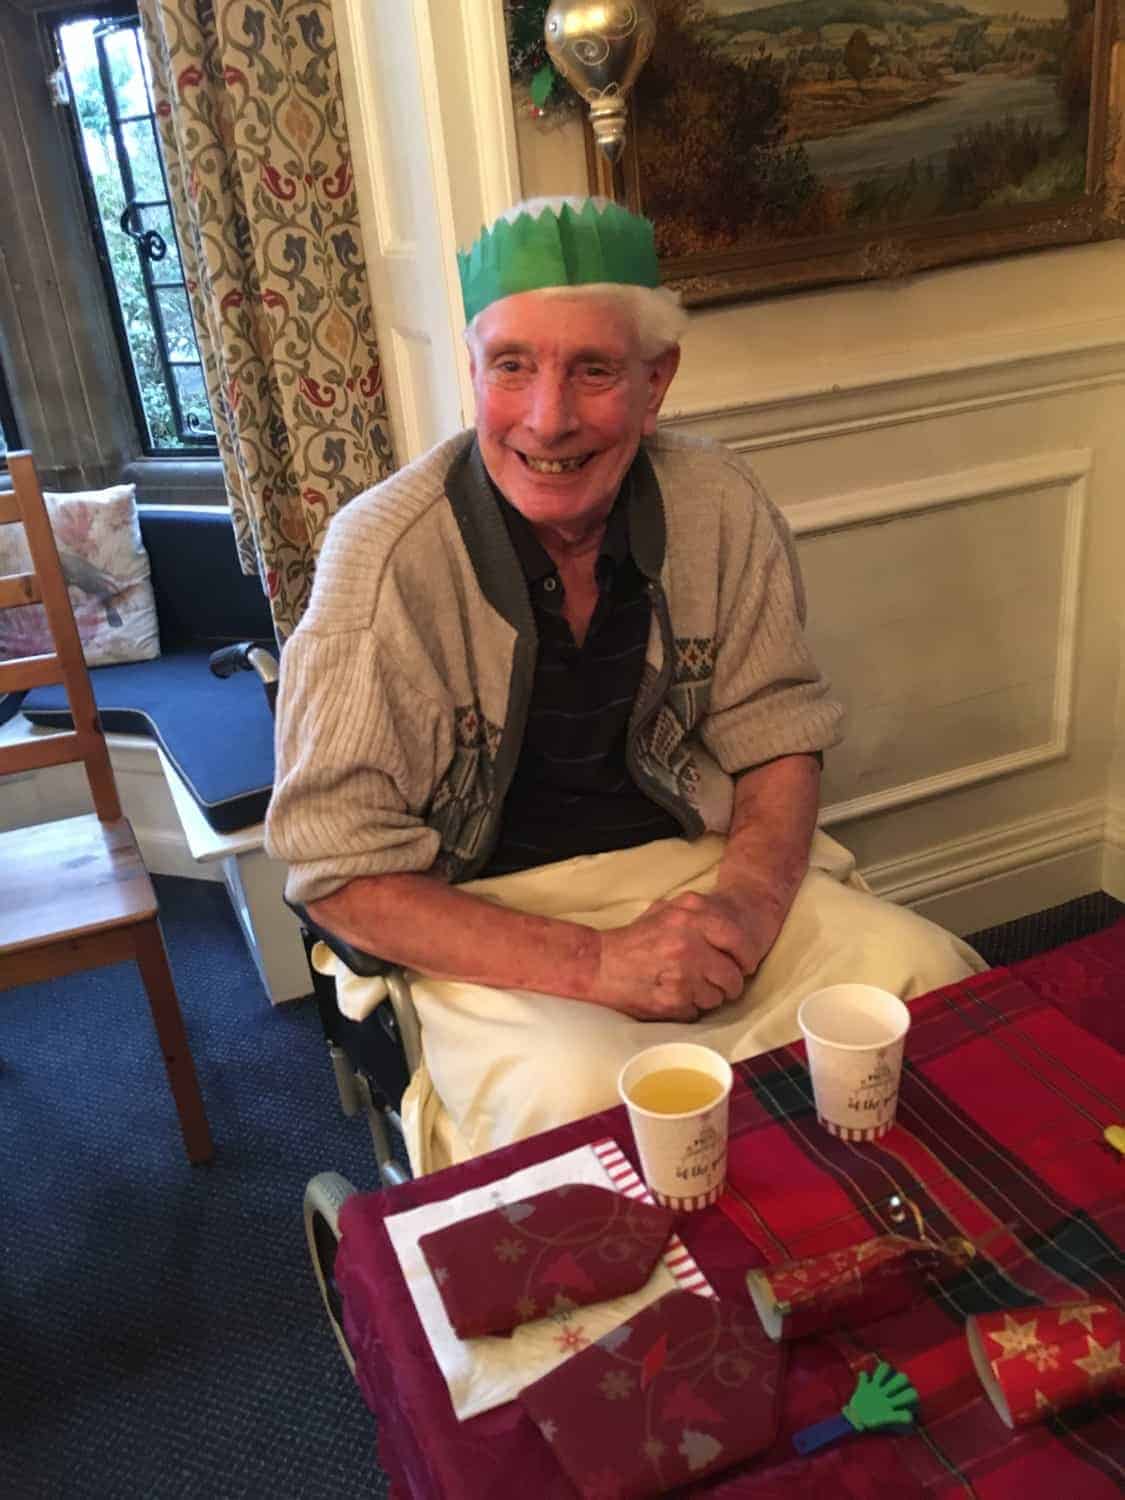 An elderly gentleman wearing a green paper crown and a warm smile, seated at a table with festive decorations in a gallery, celebrating the holiday spirit.